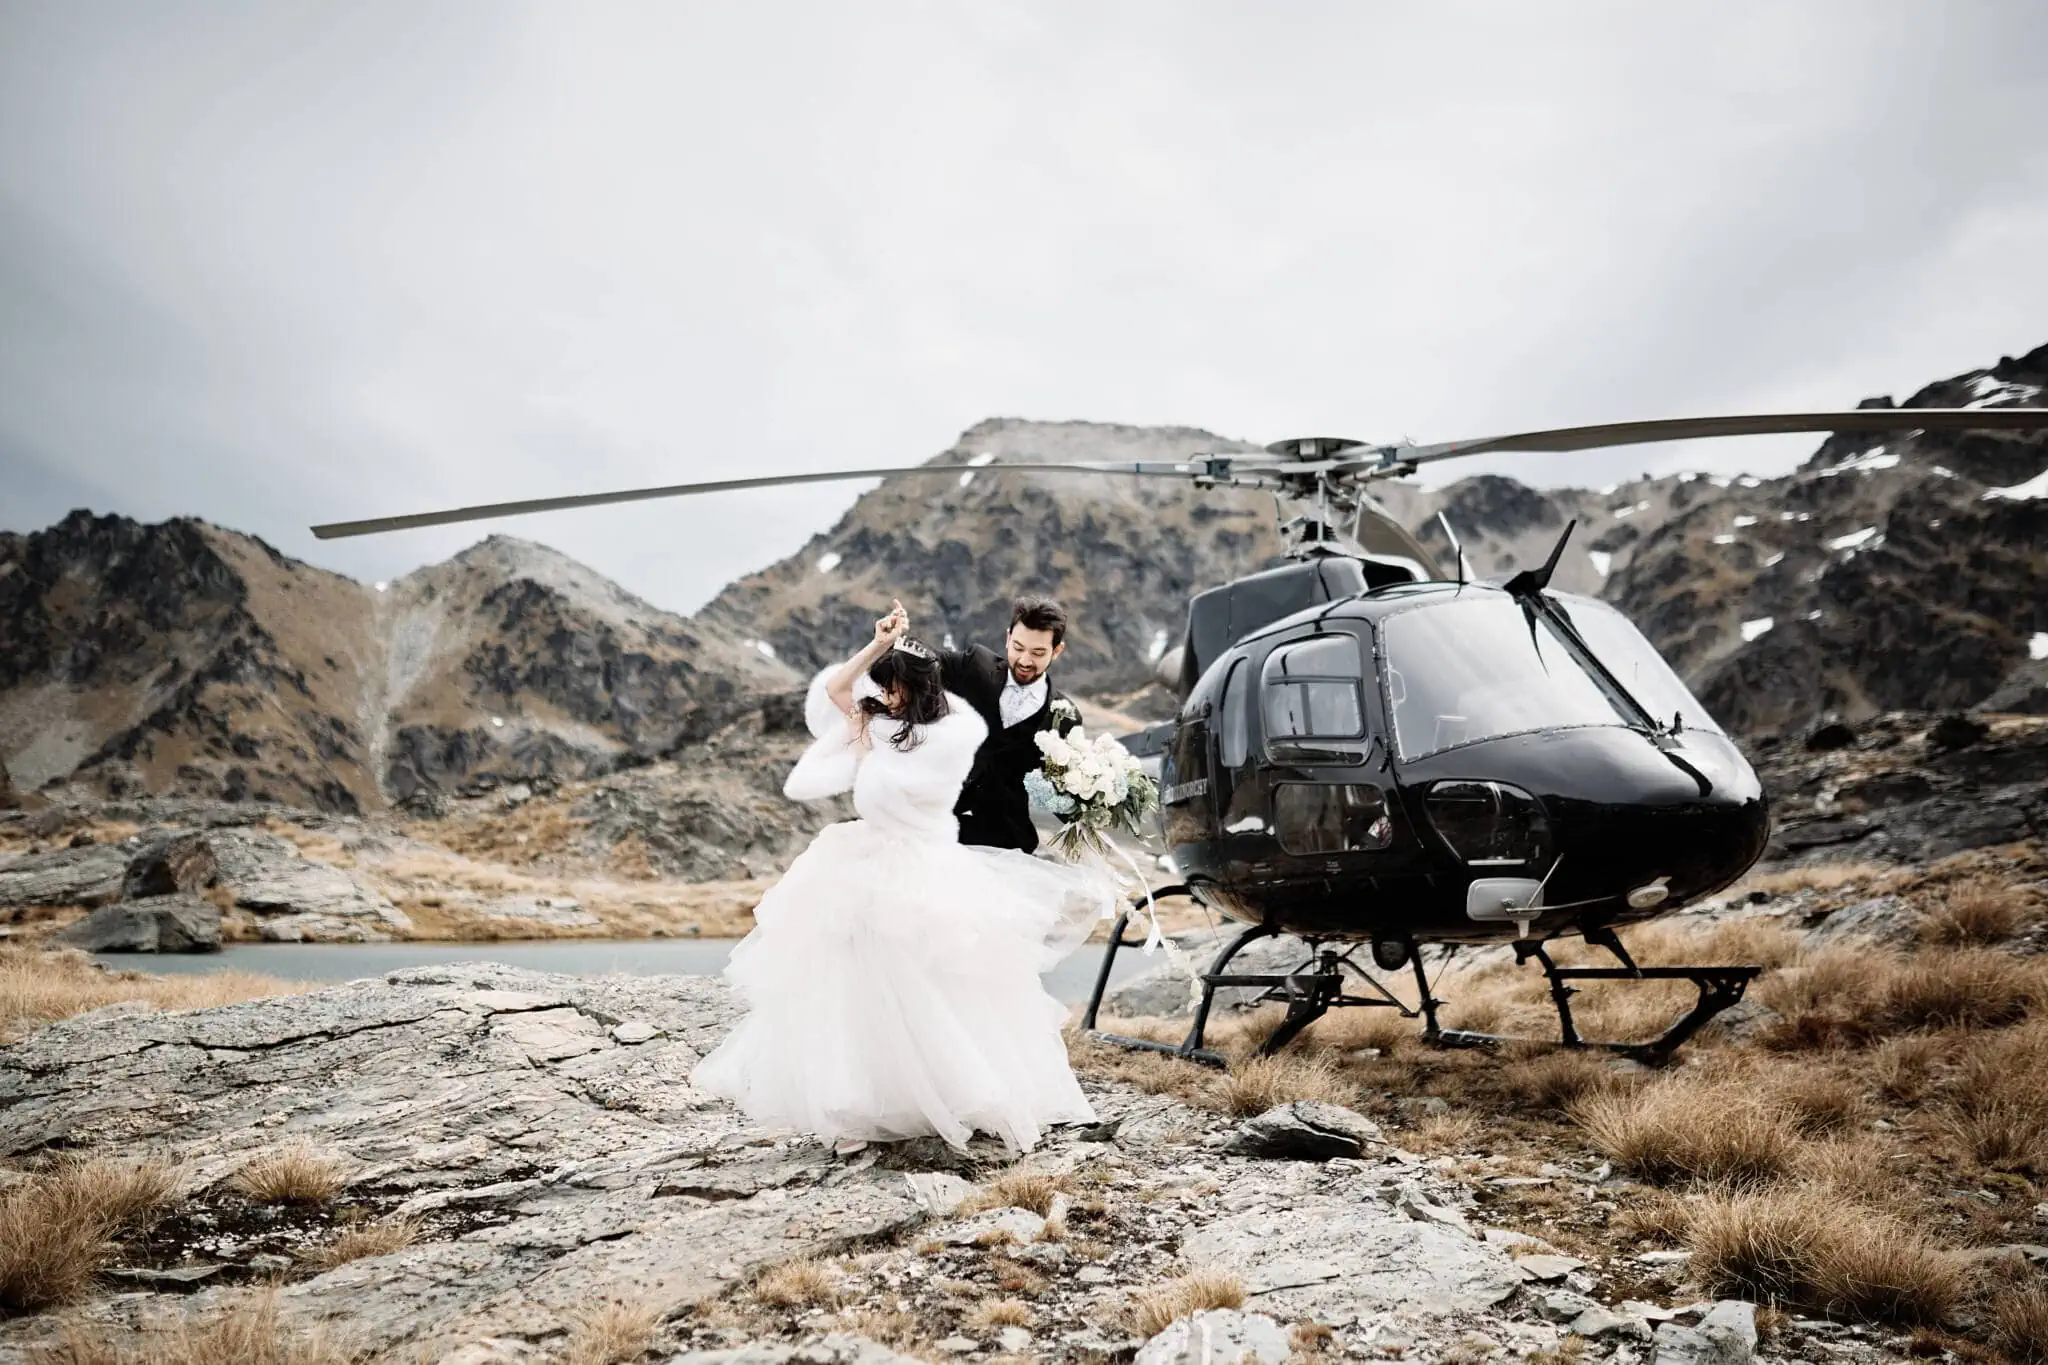 Carlos and Wanzhu embrace on their intimate Cecil Peak Heli Elopement Wedding day, standing next to a helicopter.